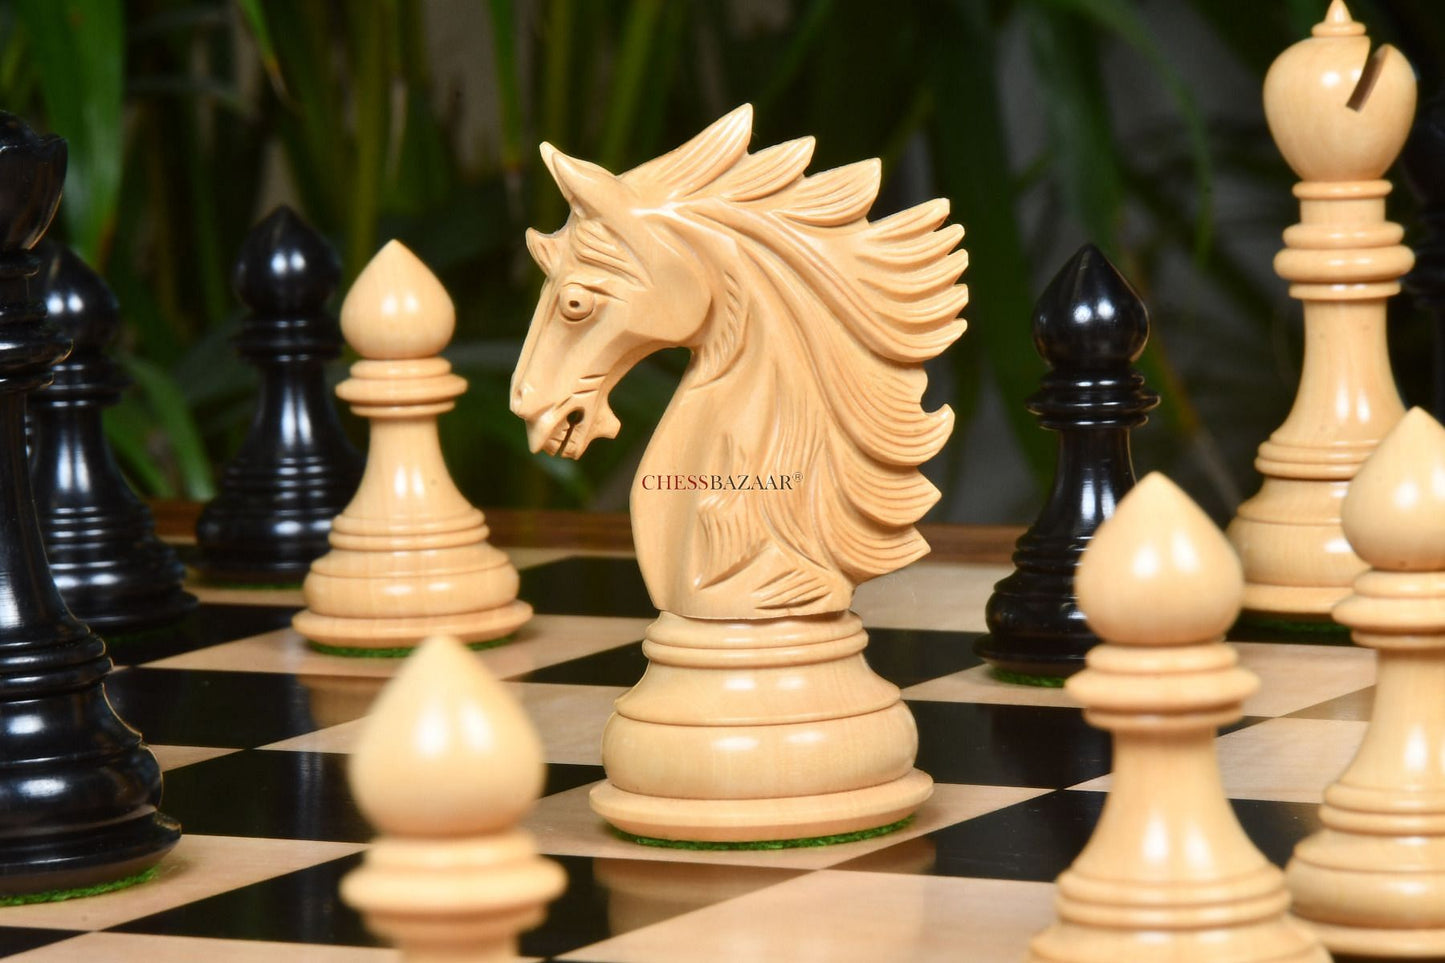 The Sher-E-Punjab Series Chess Pieces in Ebony Wood / Box Wood - 4.6" King